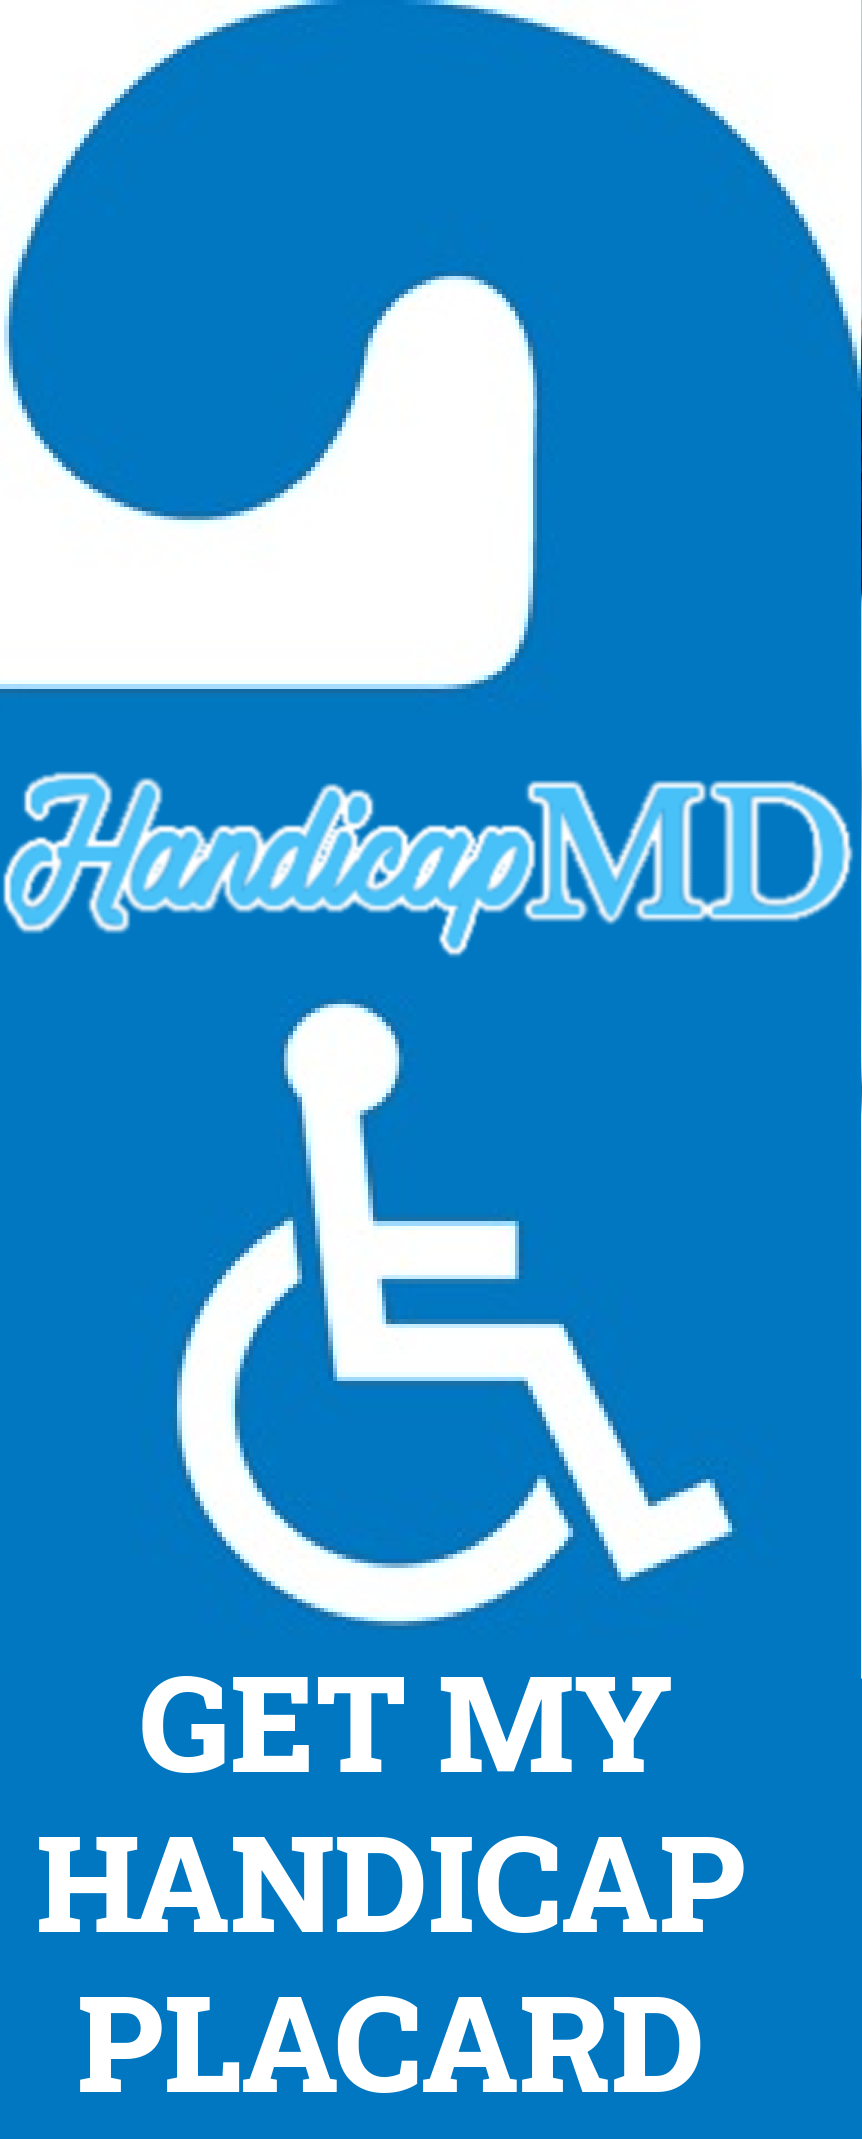 Get a Disabled Parking Permit in Louisville KY Online